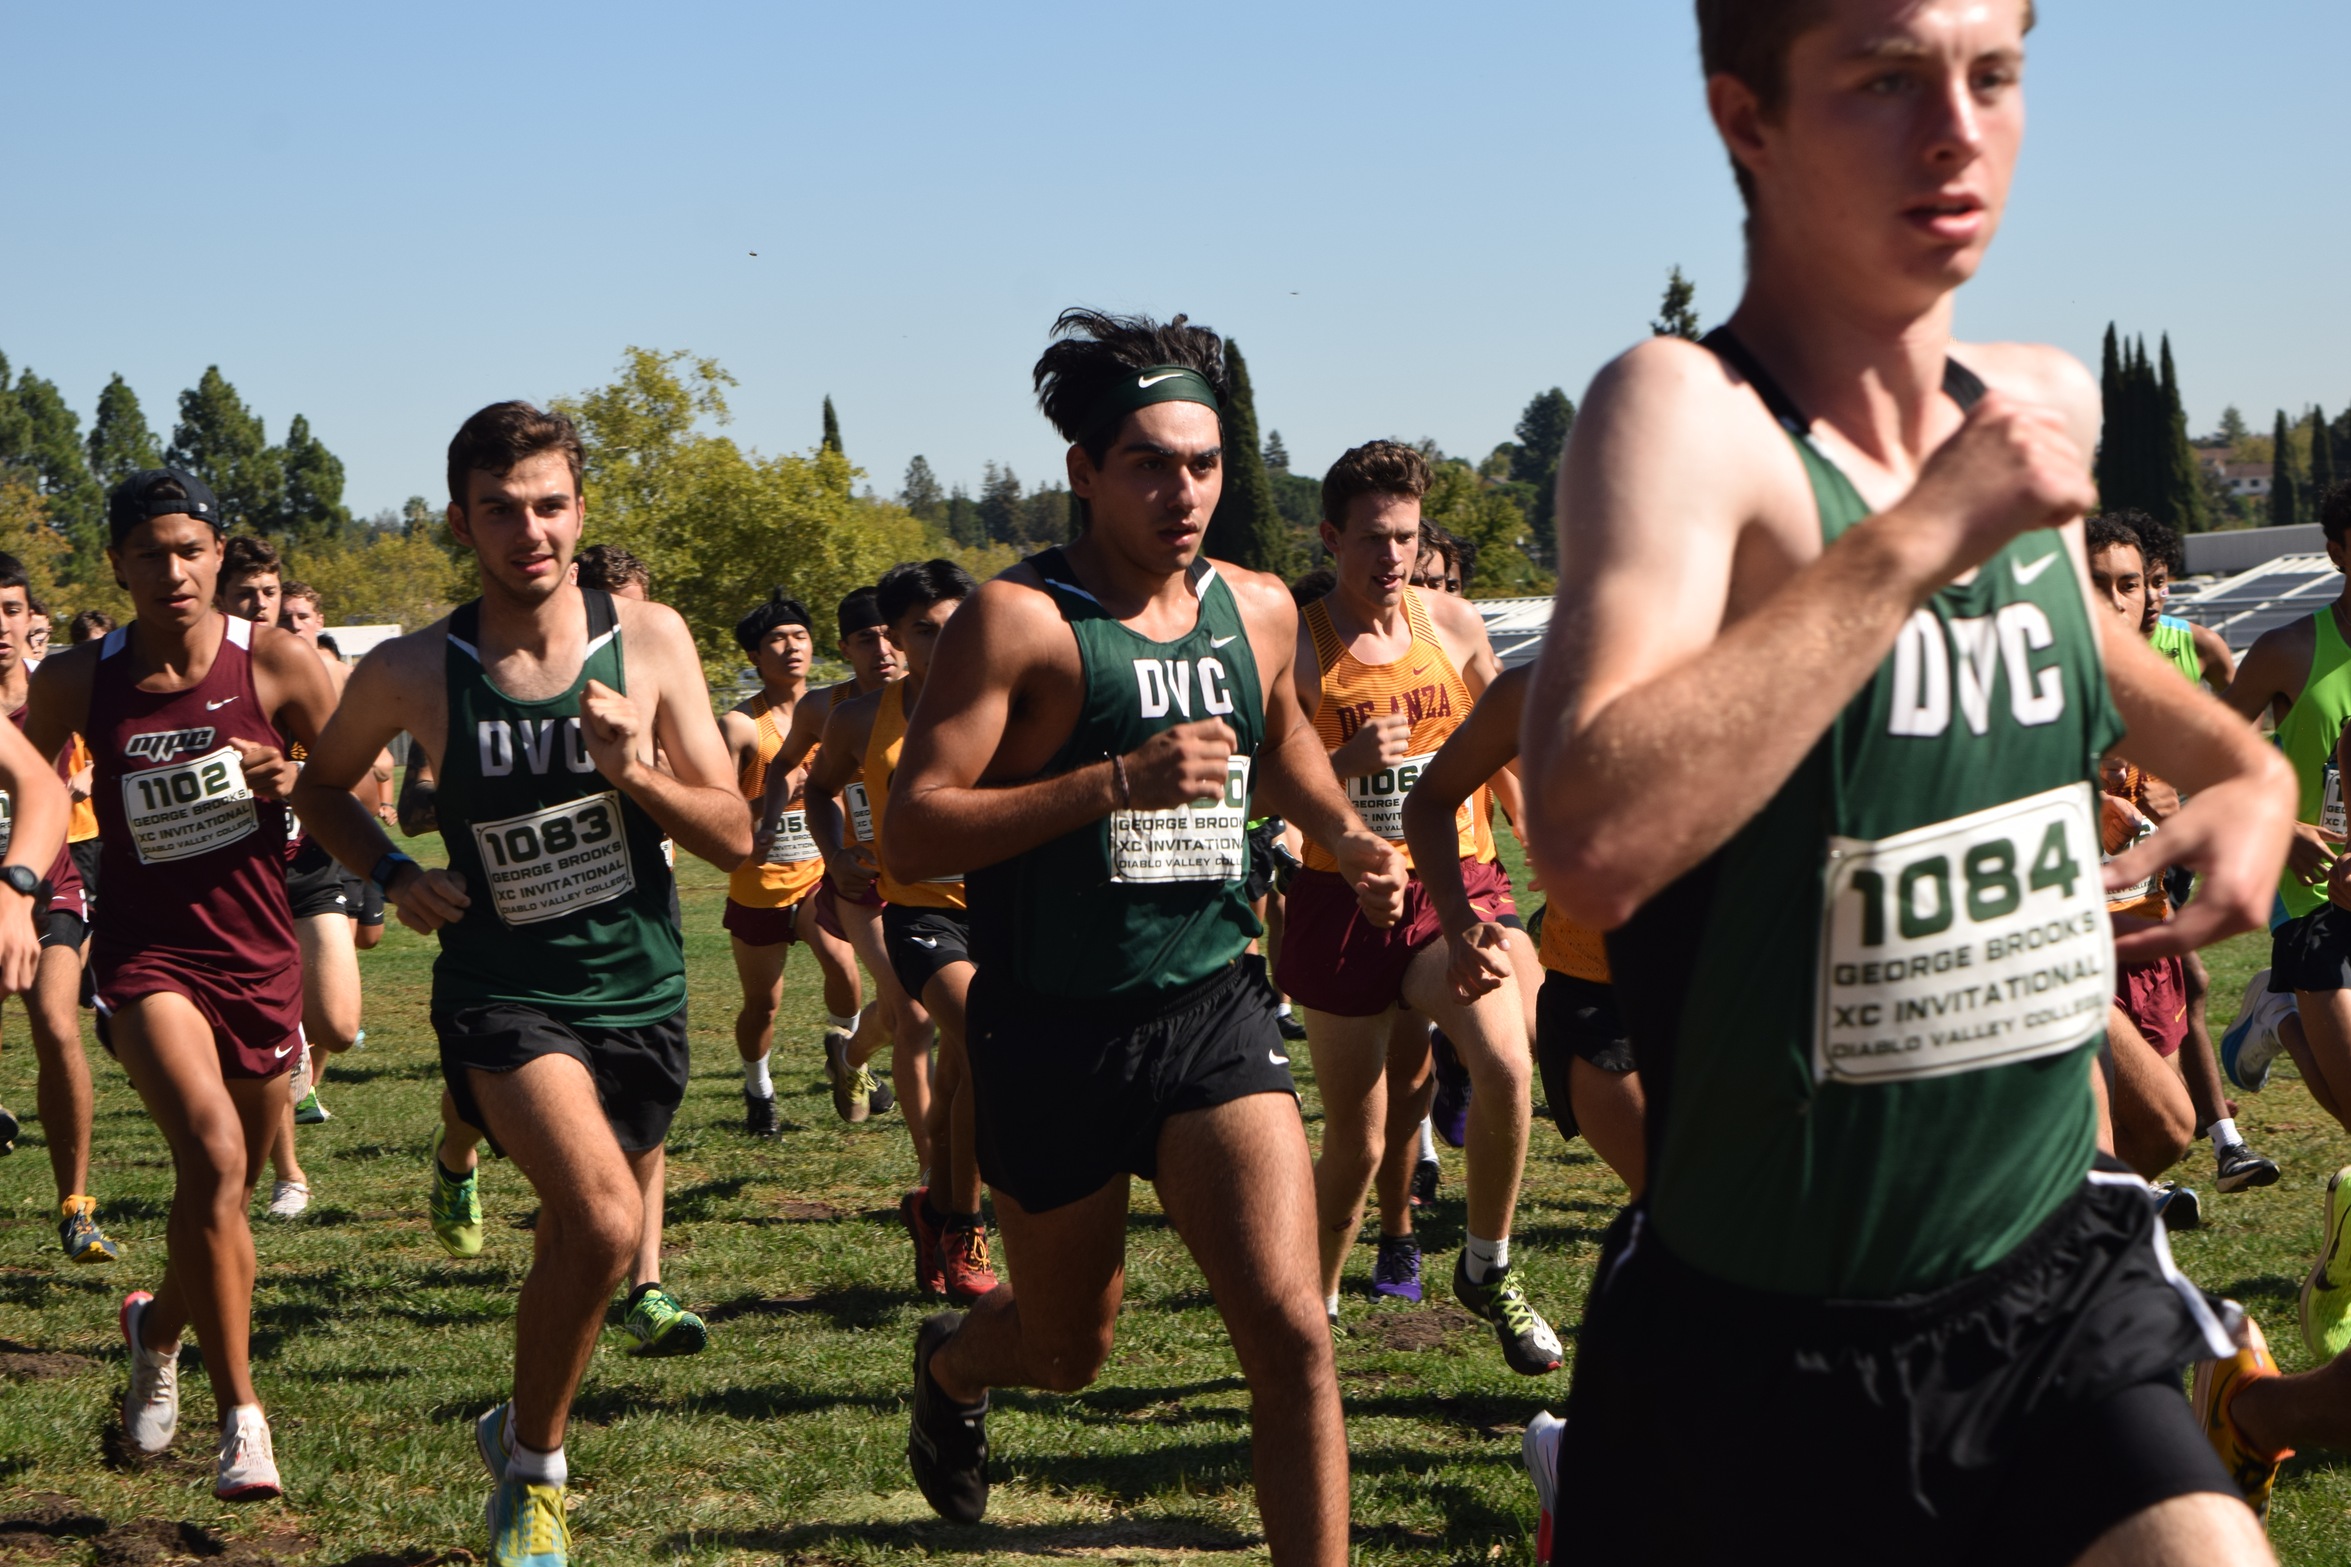 Men's Cross Country finishes 4th in George Brooks Memorial